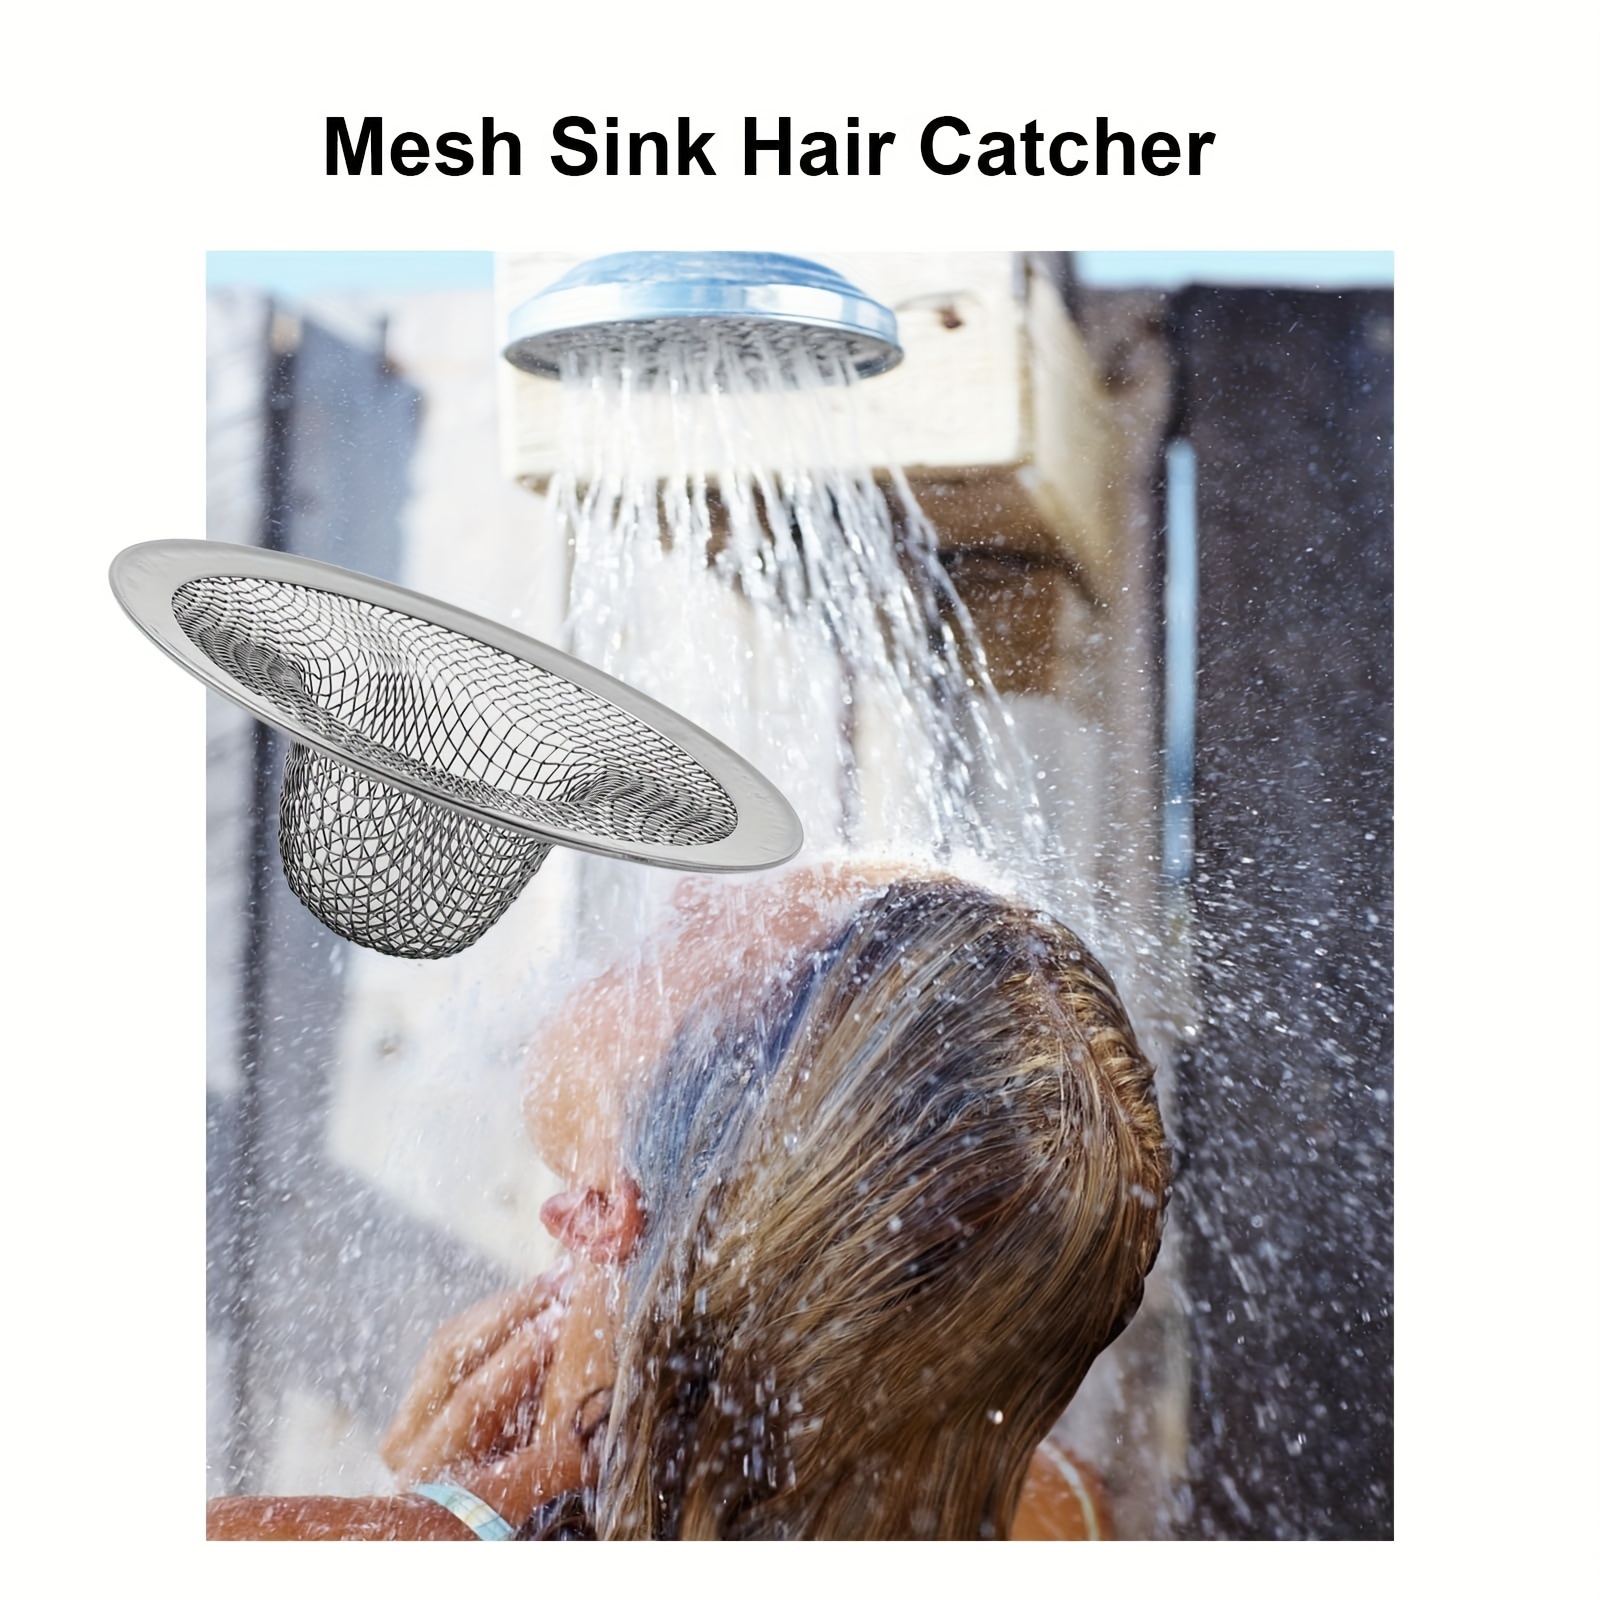 Dependable 2 Pack Hair Catcher Drain Protector Value 2 Pack Prevents Hair from Clogging Drains